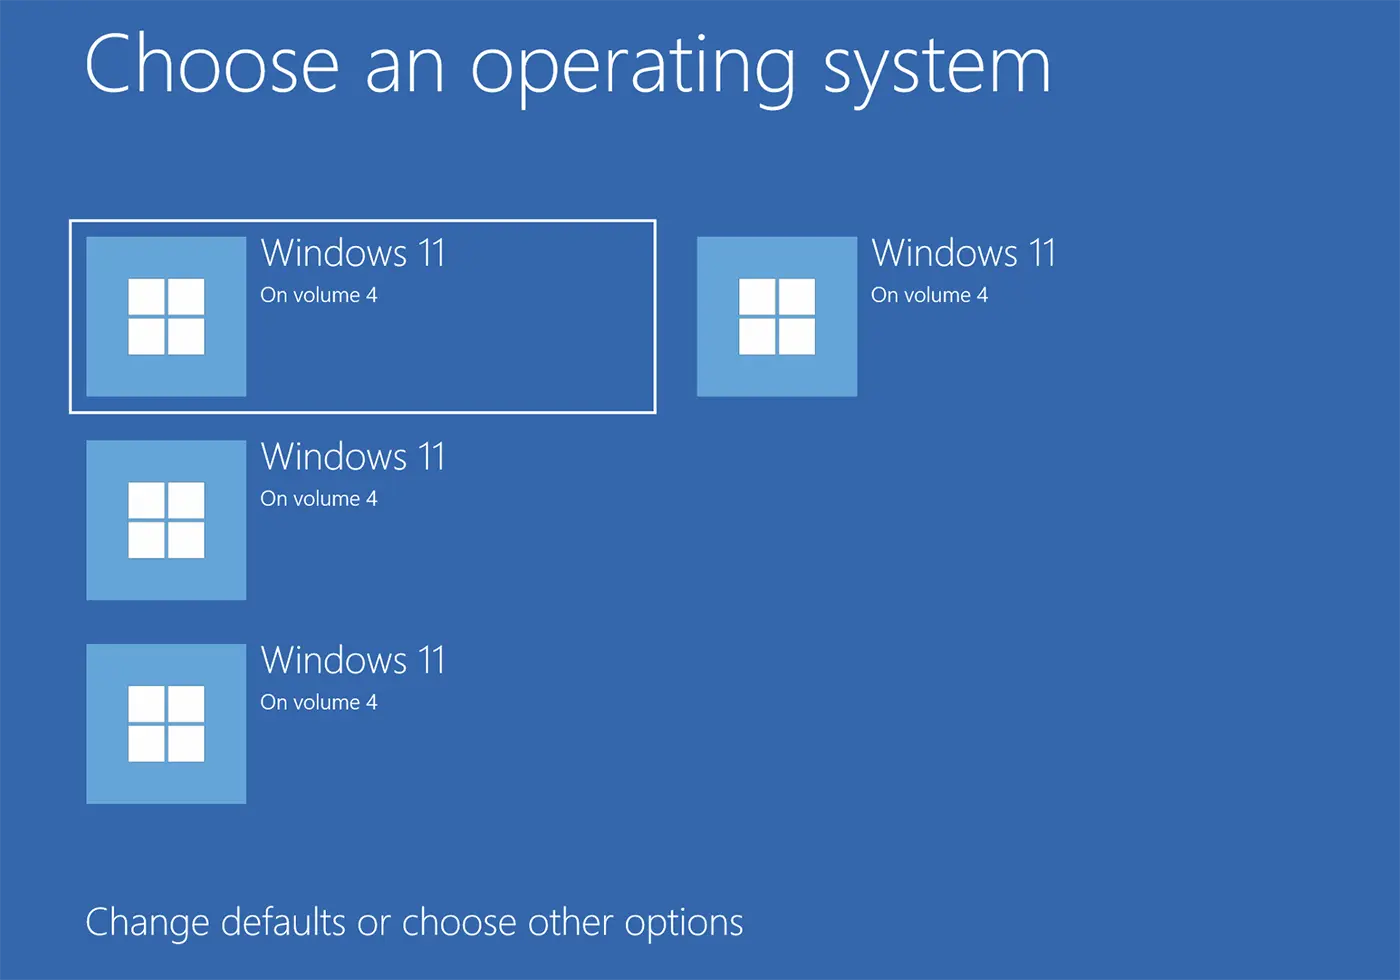 Choose an operating system. Windows 11 on Volume 4